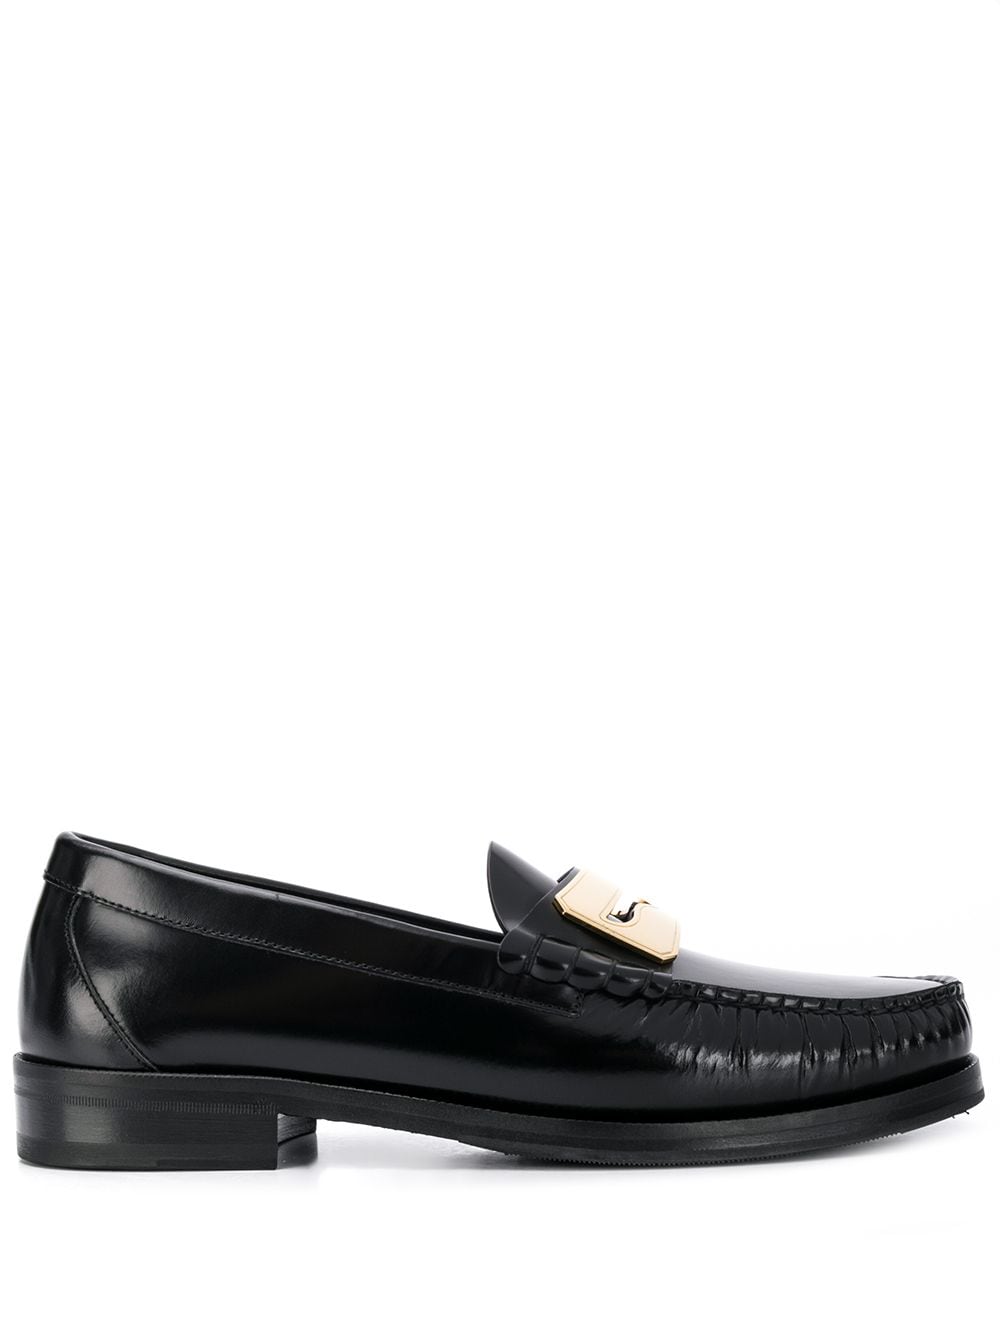 Buscemi Plaque Embellished Loafers - Farfetch